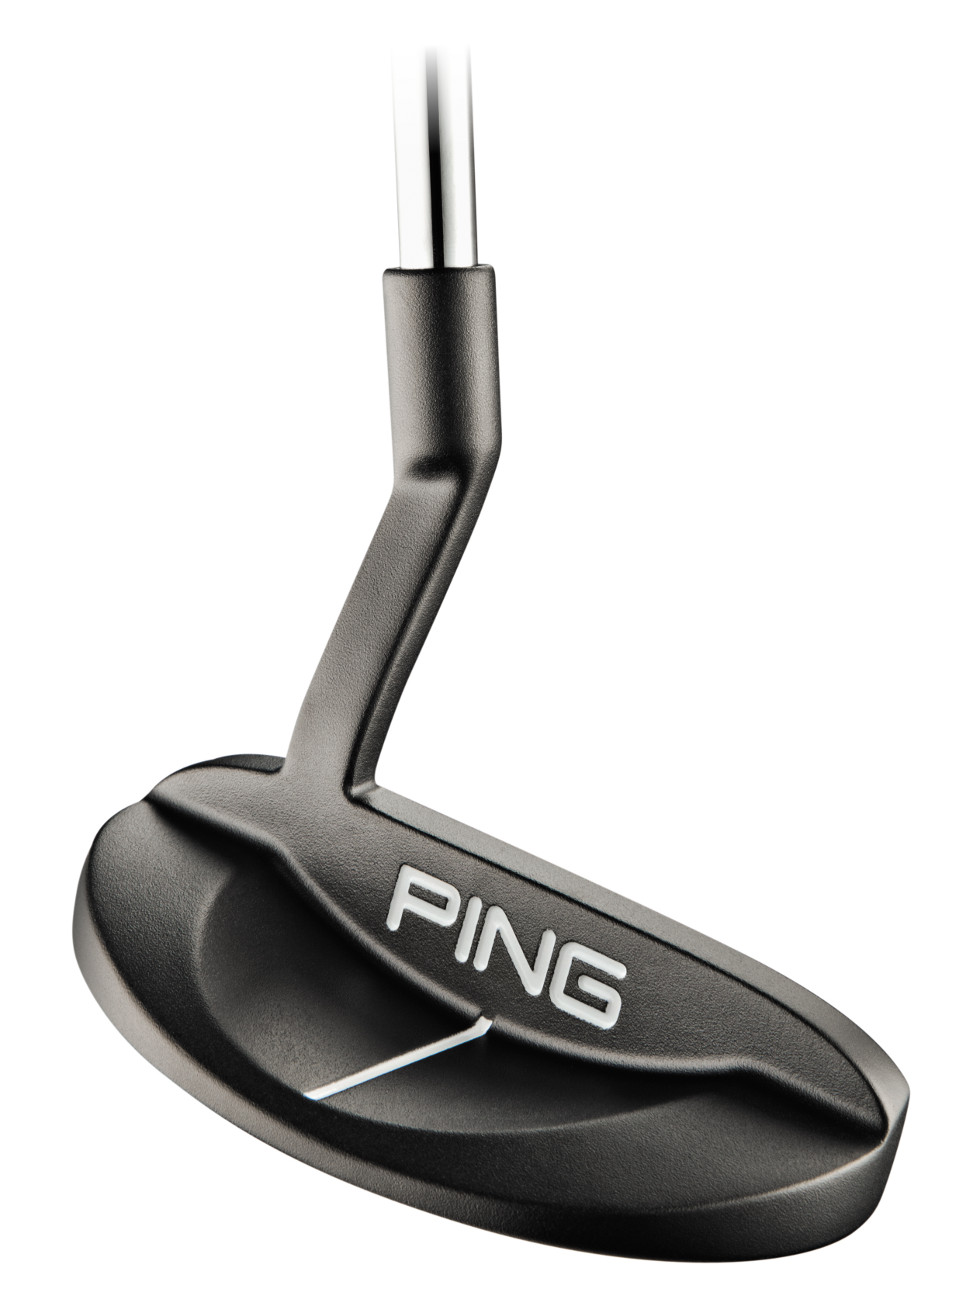 PING Scottsdale, Sydney, and Anser Milled Putters (Bag Drop) - The Sand ...